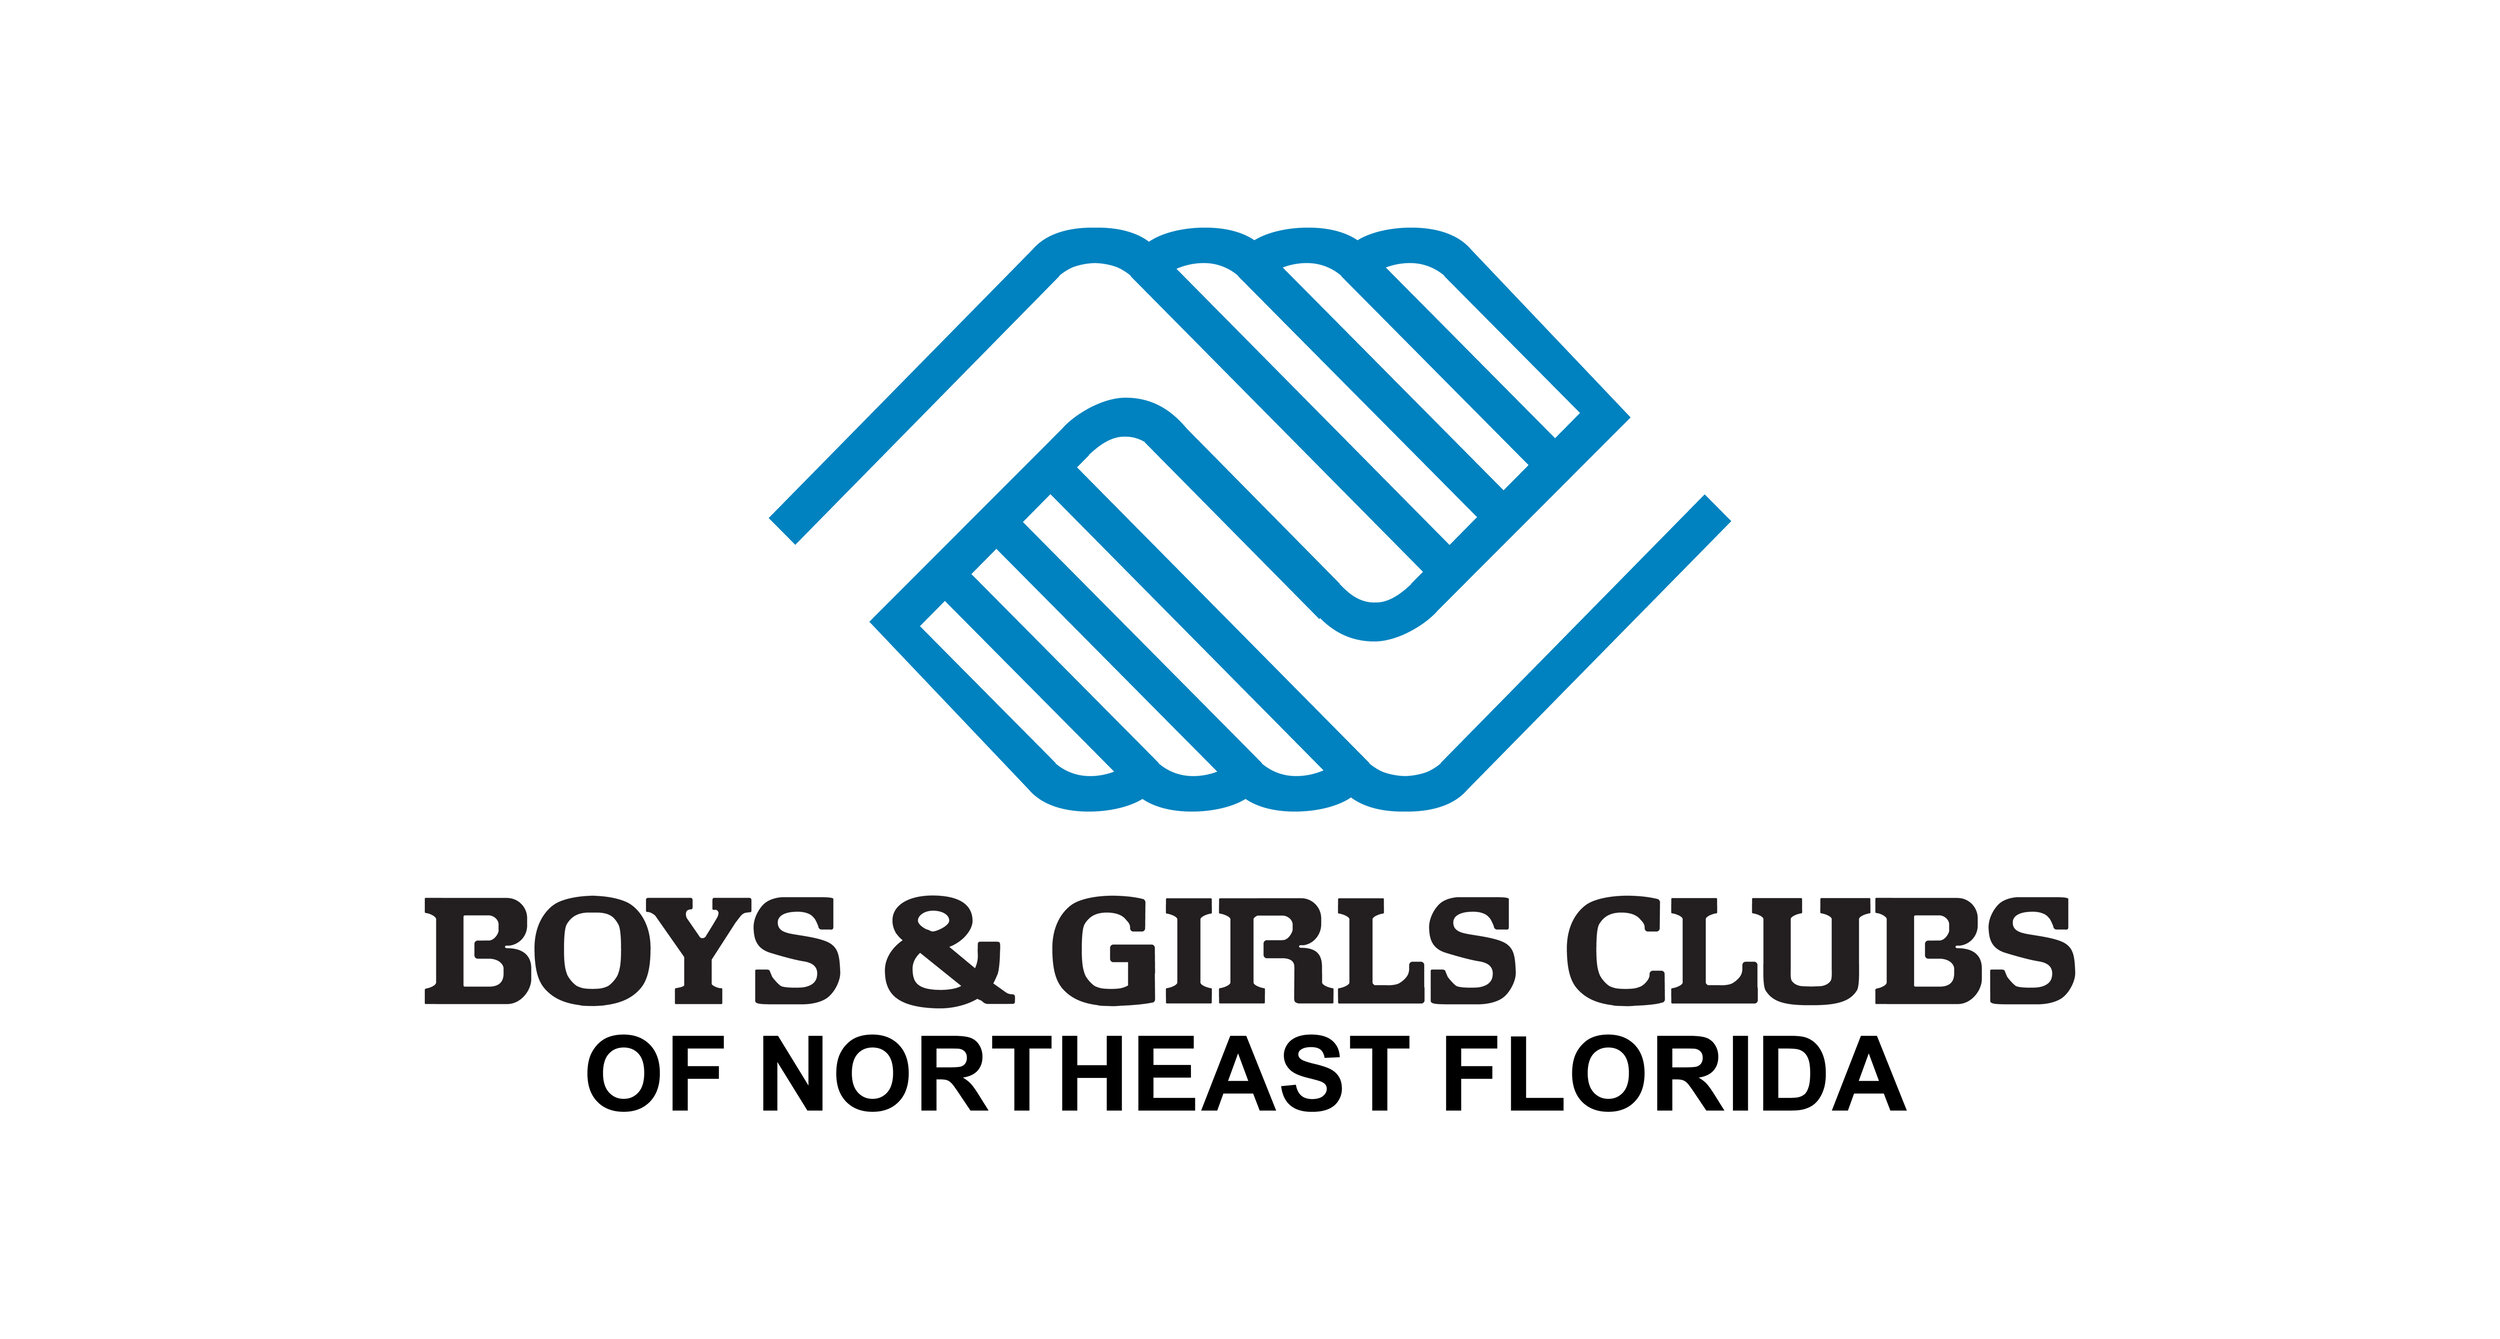 Picture shows two hands clasped together with text underneath that reads "Boys & Girls Clubs of Northeast Florida"